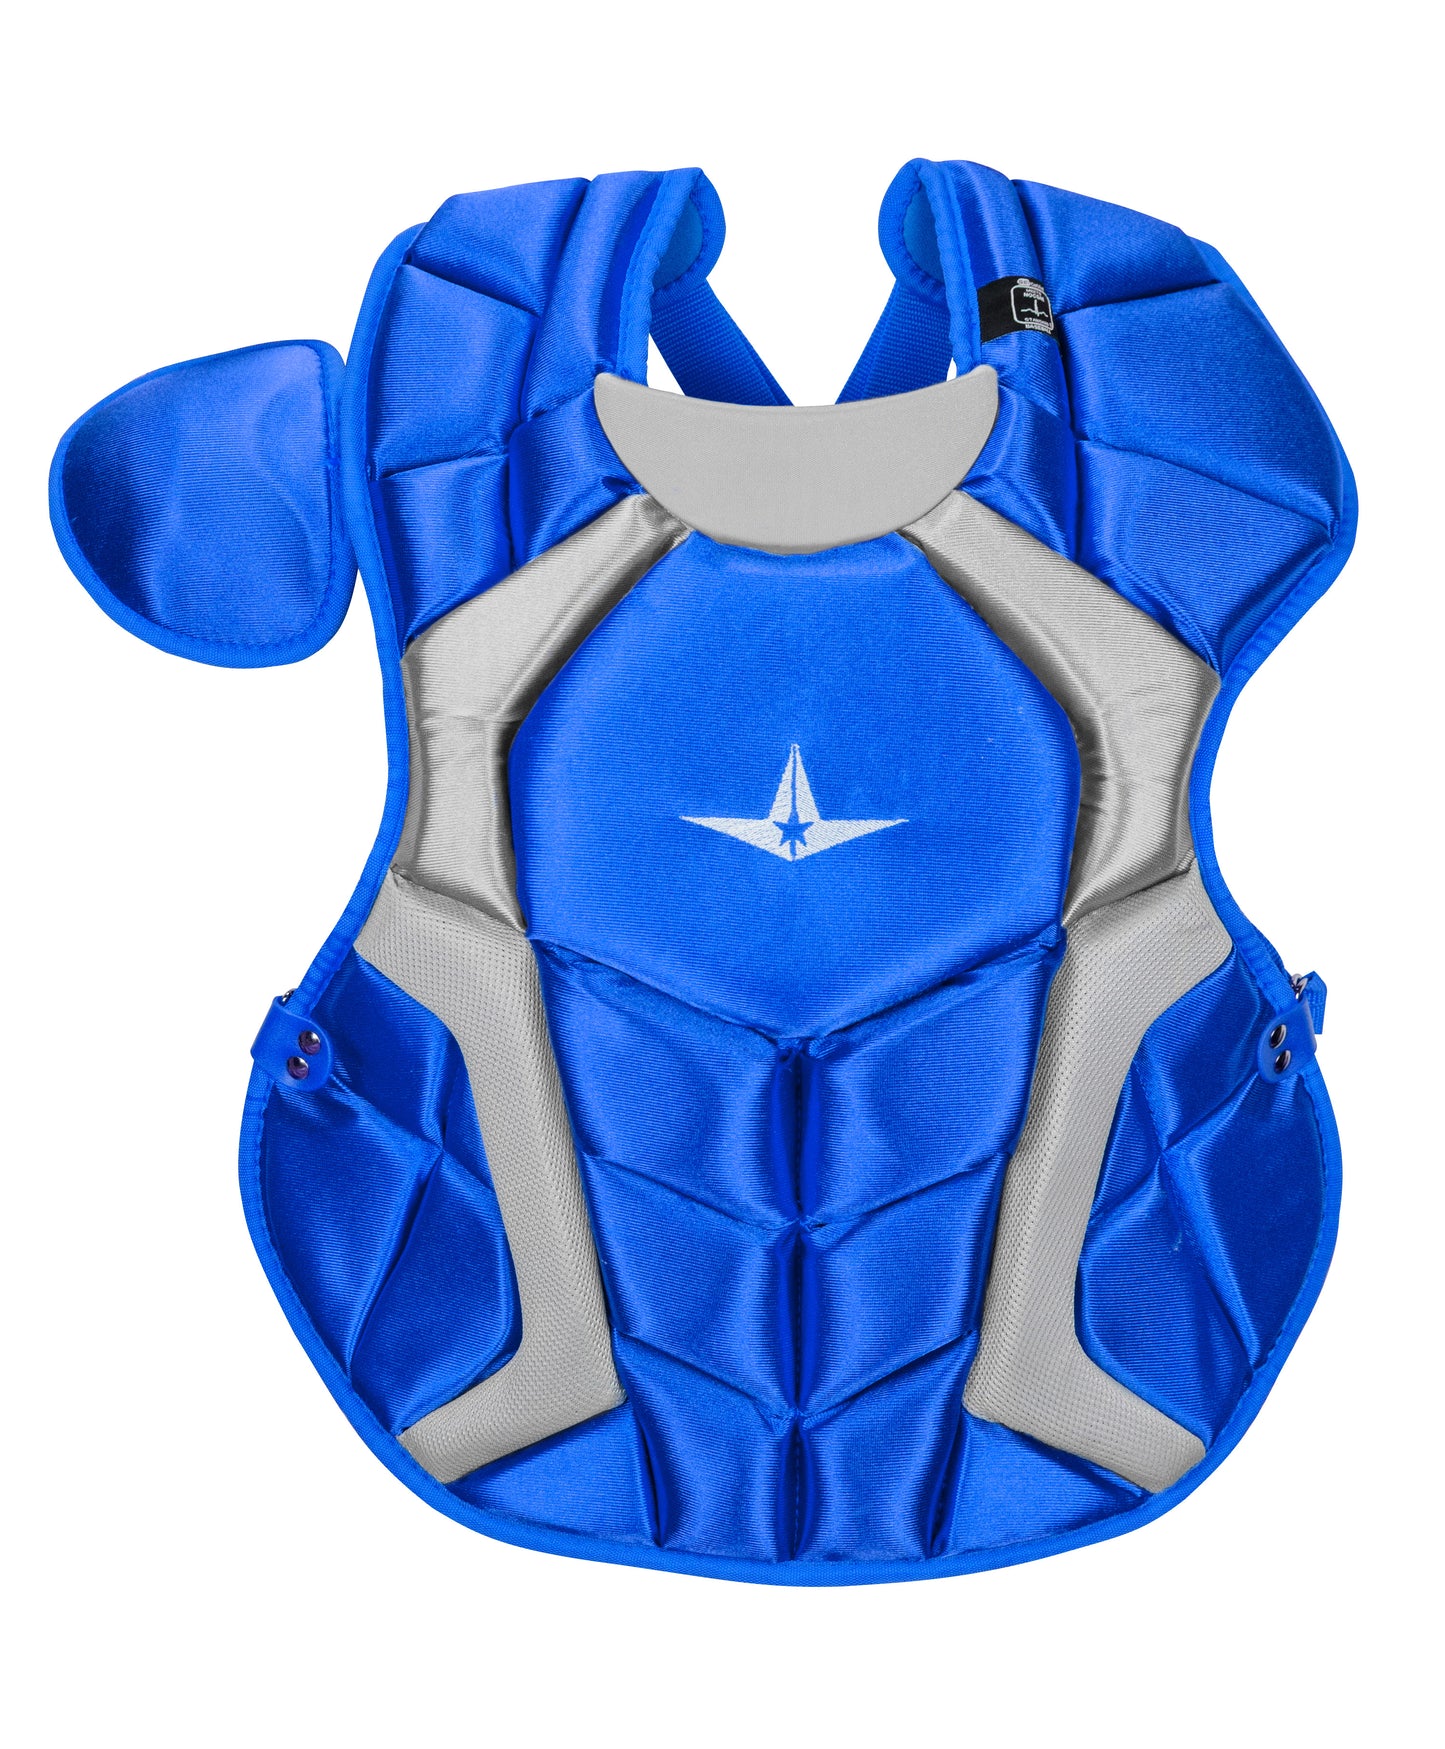 all-star-sei-certified-system7-youth-chest-protector